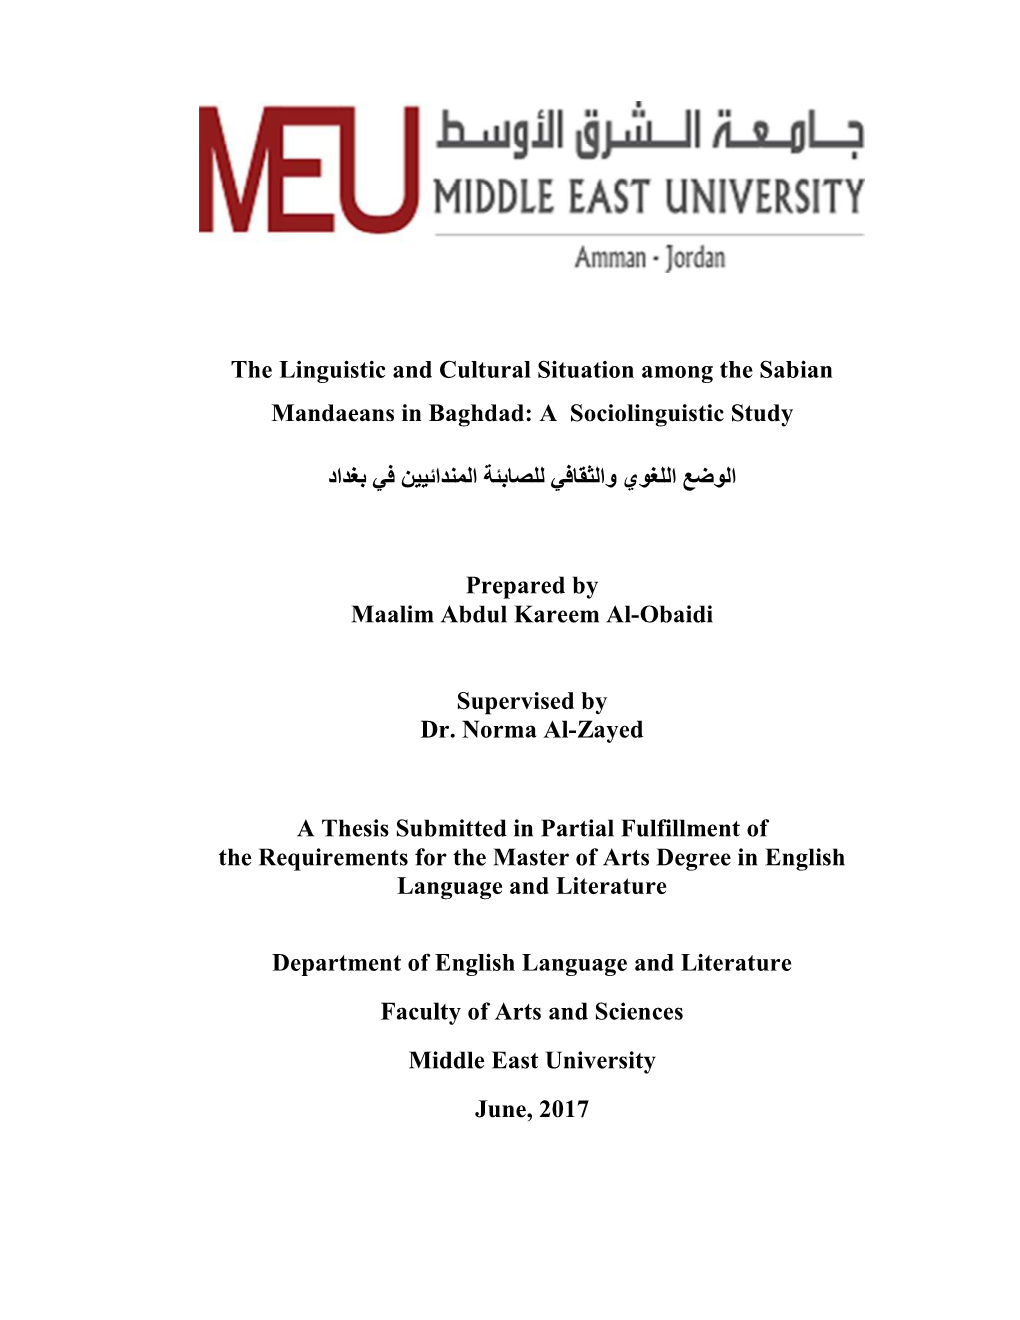 The Linguistic and Cultural Situation Among the Sabian Mandaeans in Baghdad: a Sociolinguistic Study